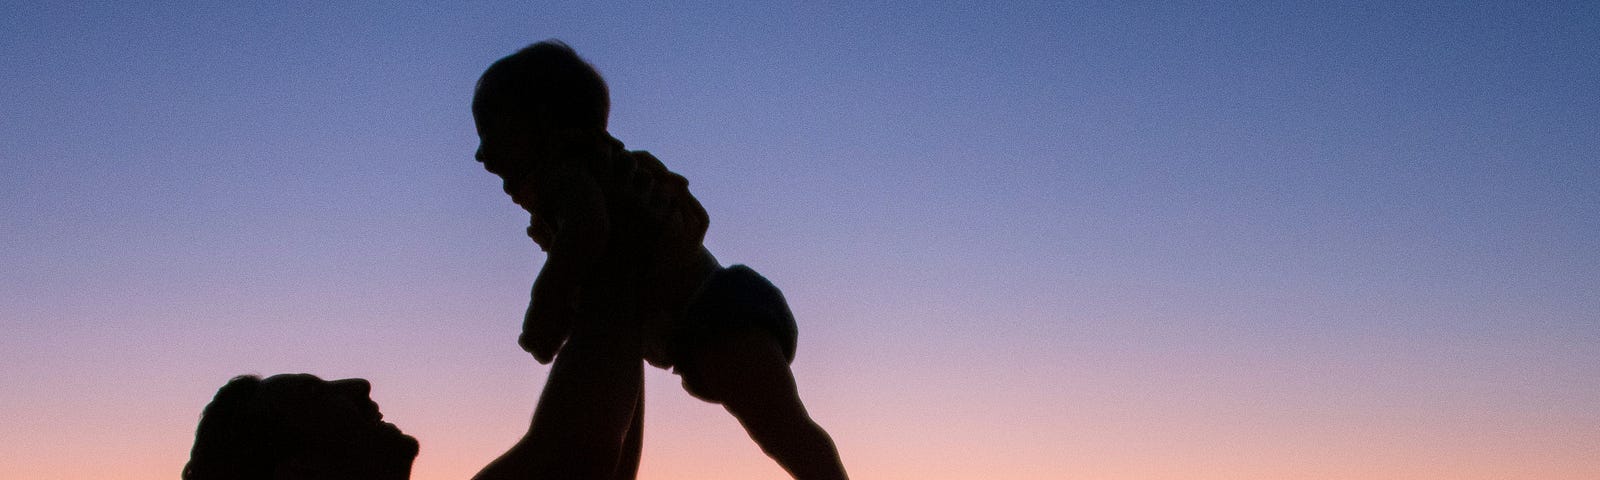 Color photo. In the foreground, a father lifts his baby son up above his head. In the background is a stunning sunset.